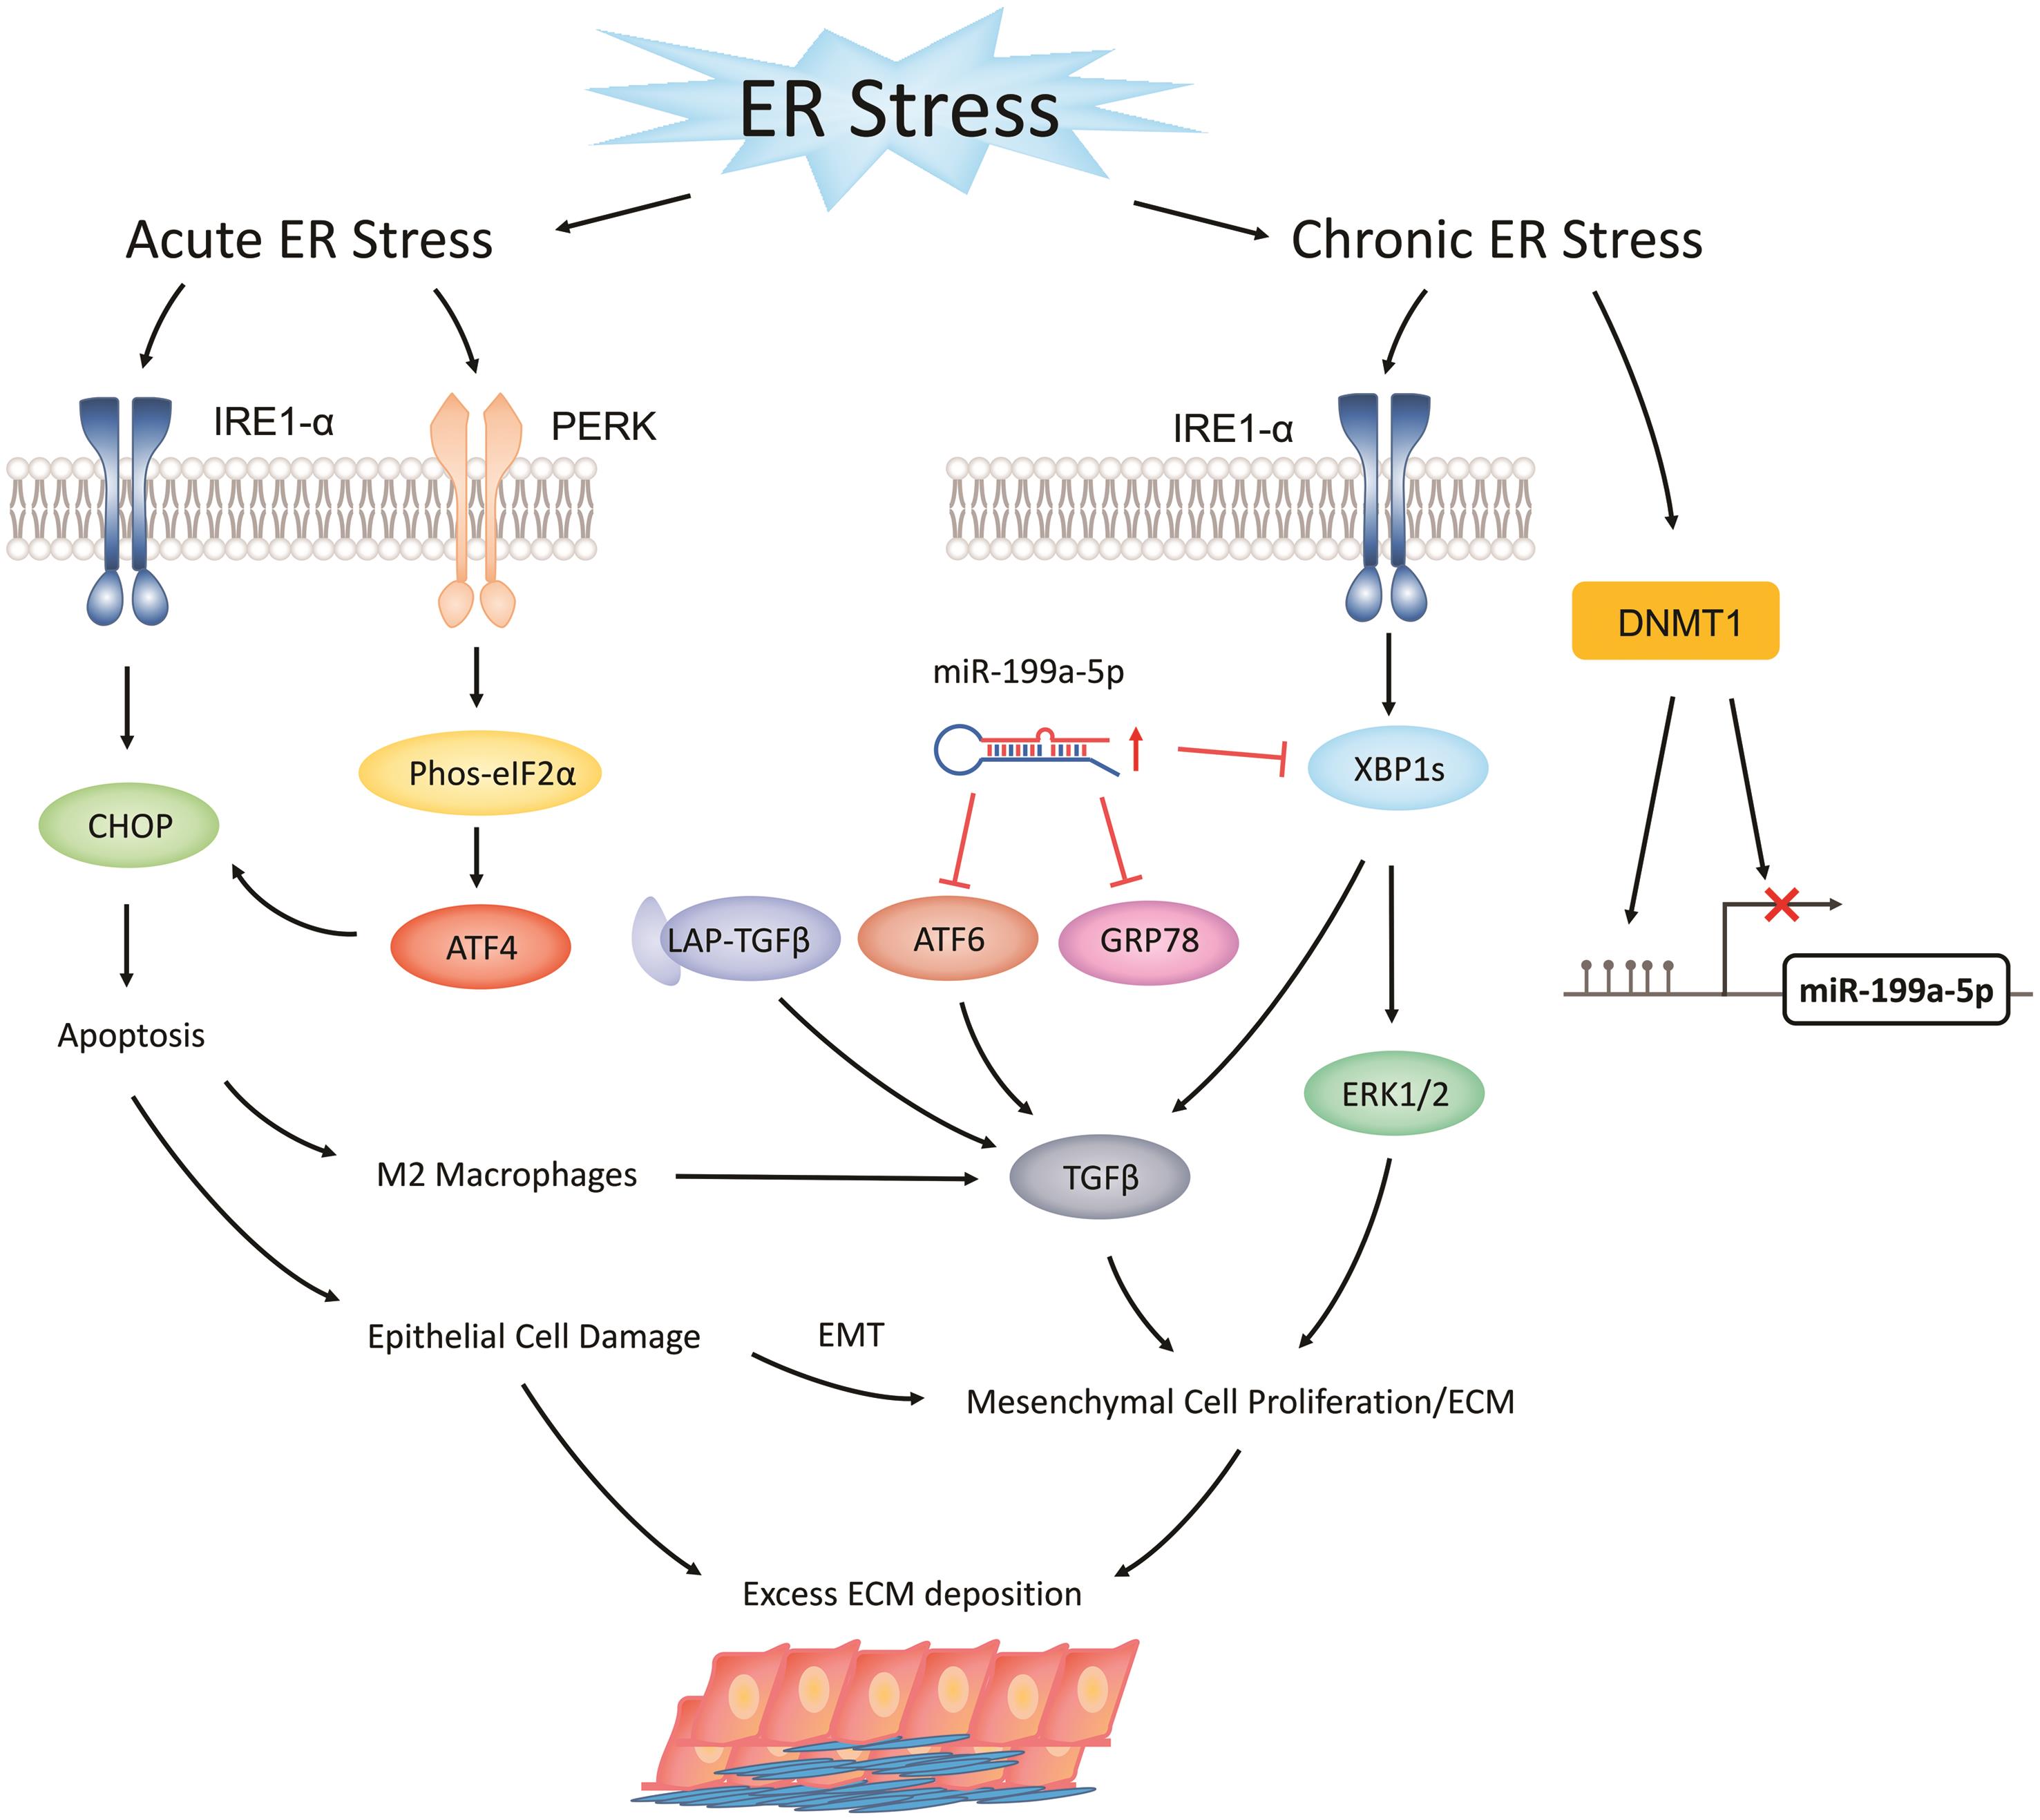 The hypothesis of dual roles of ER stress and UPR in the development of intestinal fibrosis in Crohn’s disease.